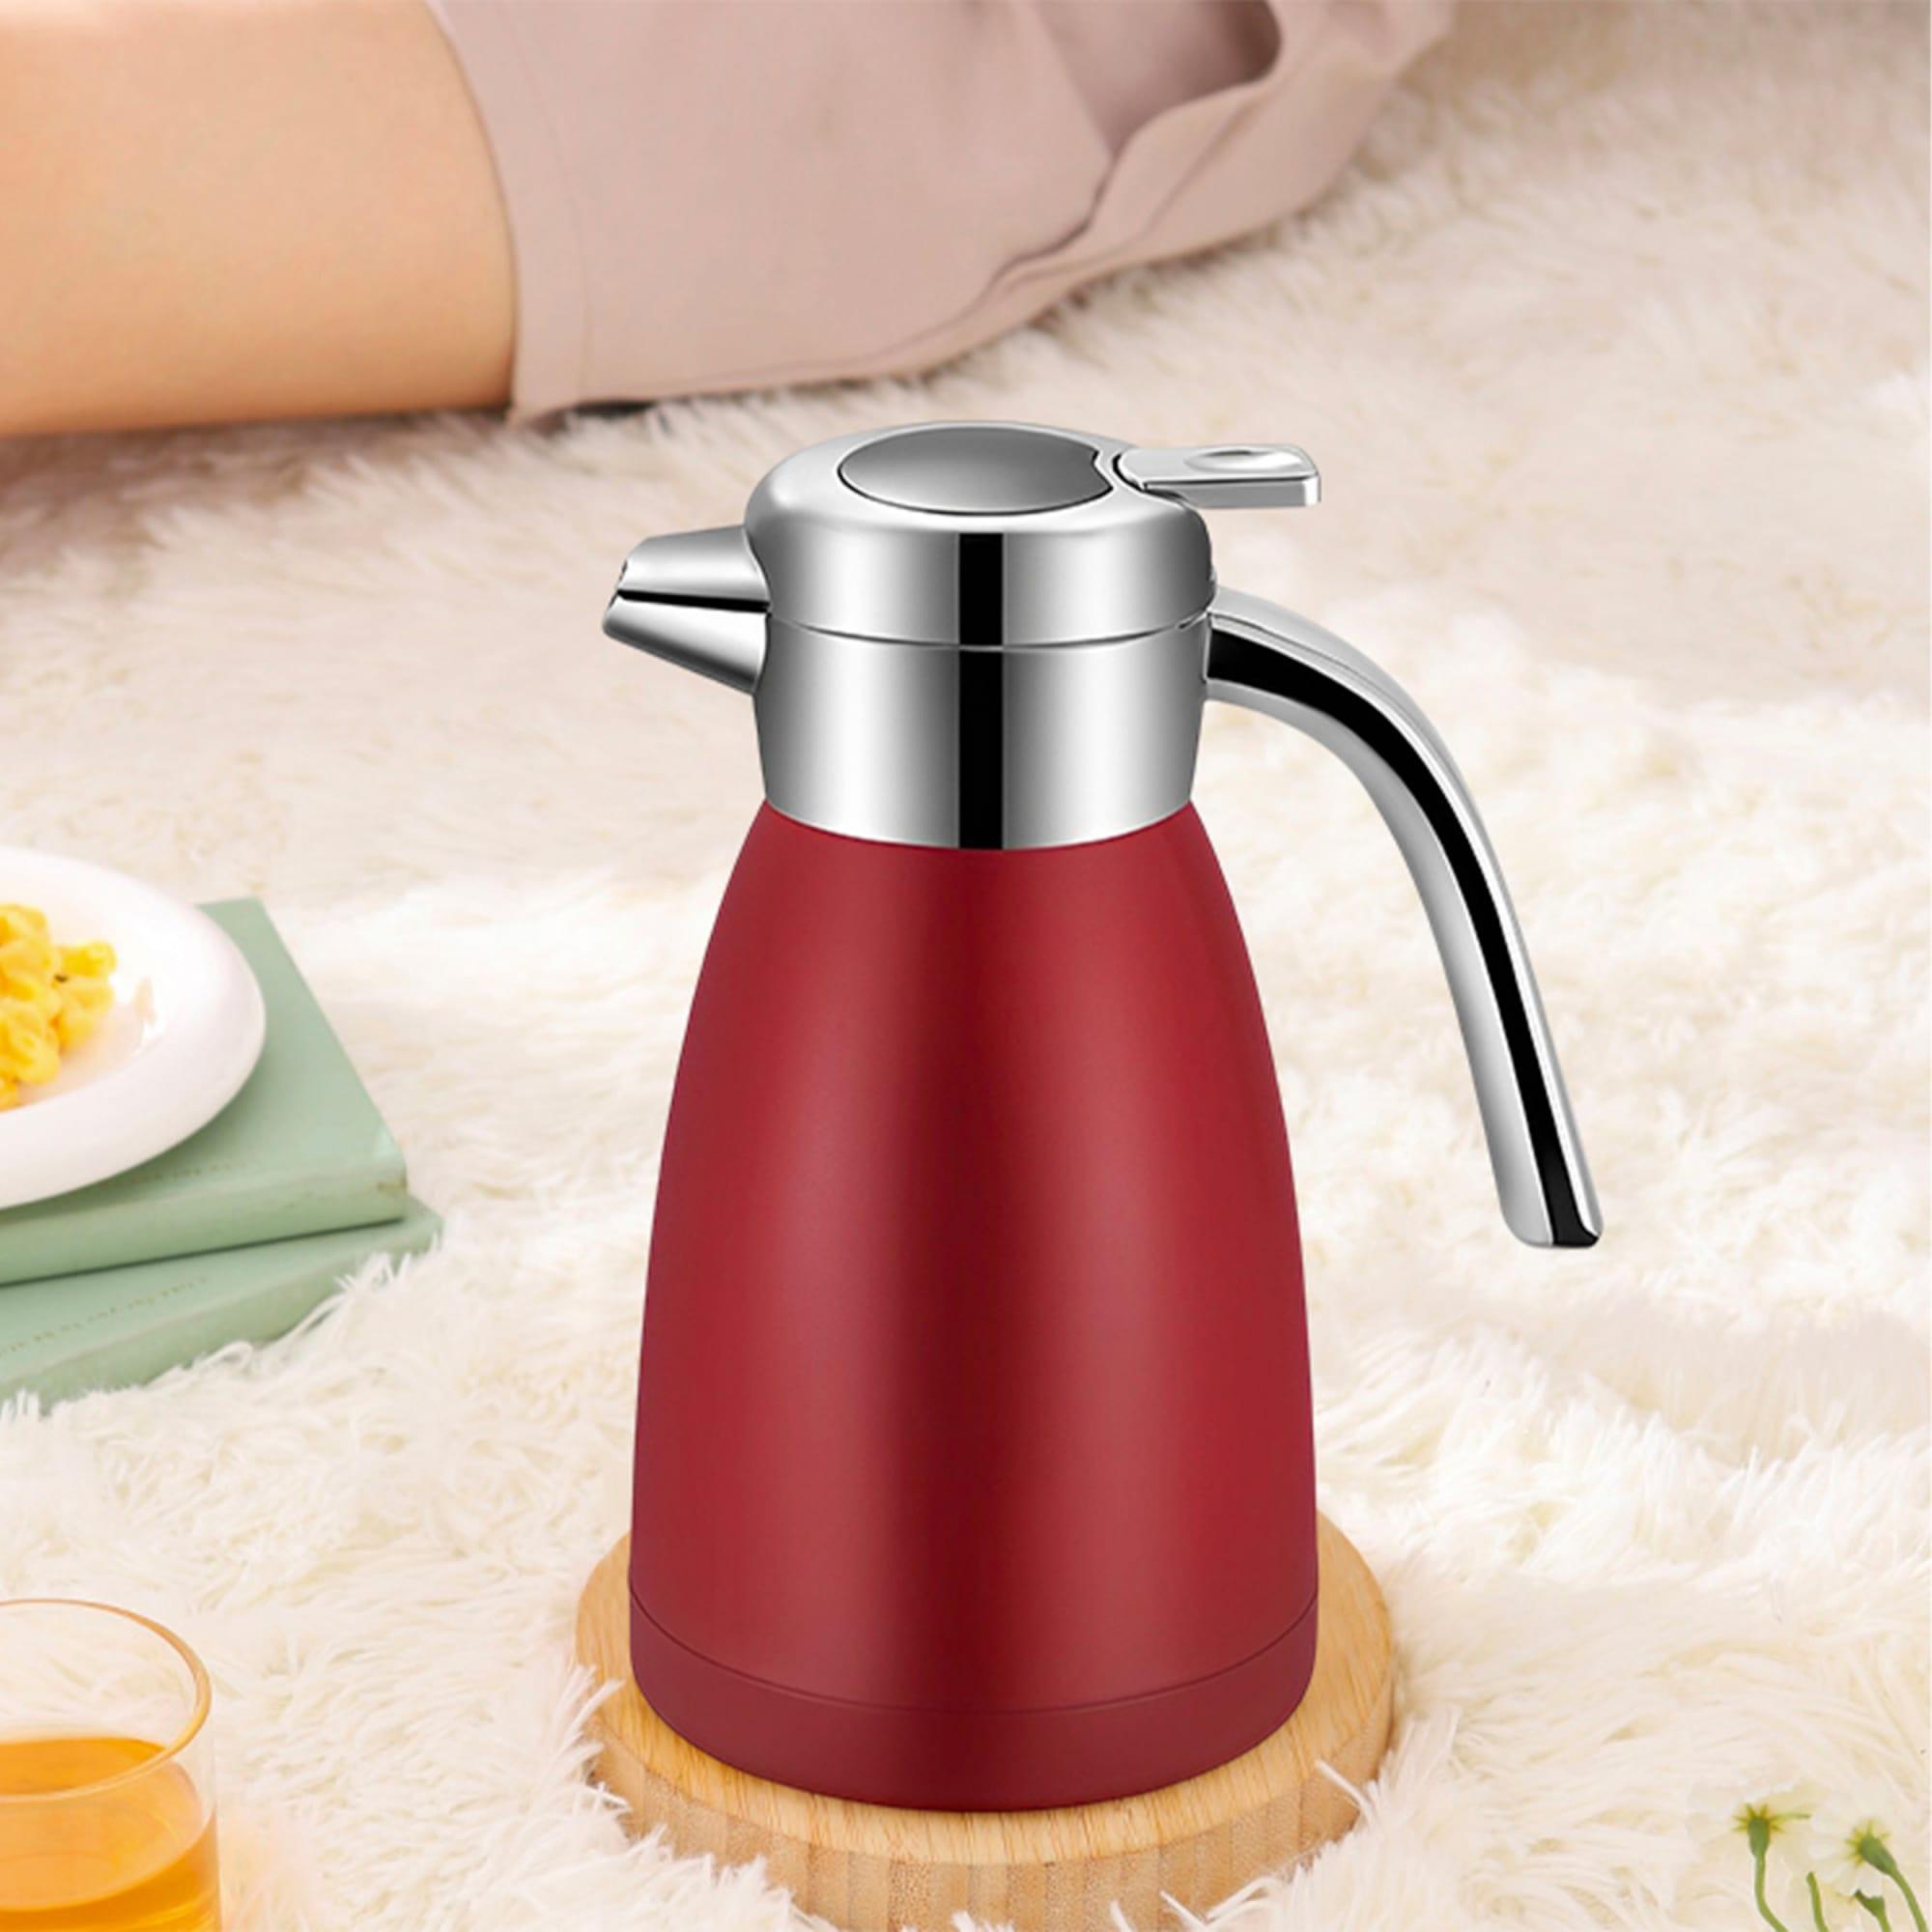 Soga Stainless Steel Insulated Kettle 1.8L Red Image 3